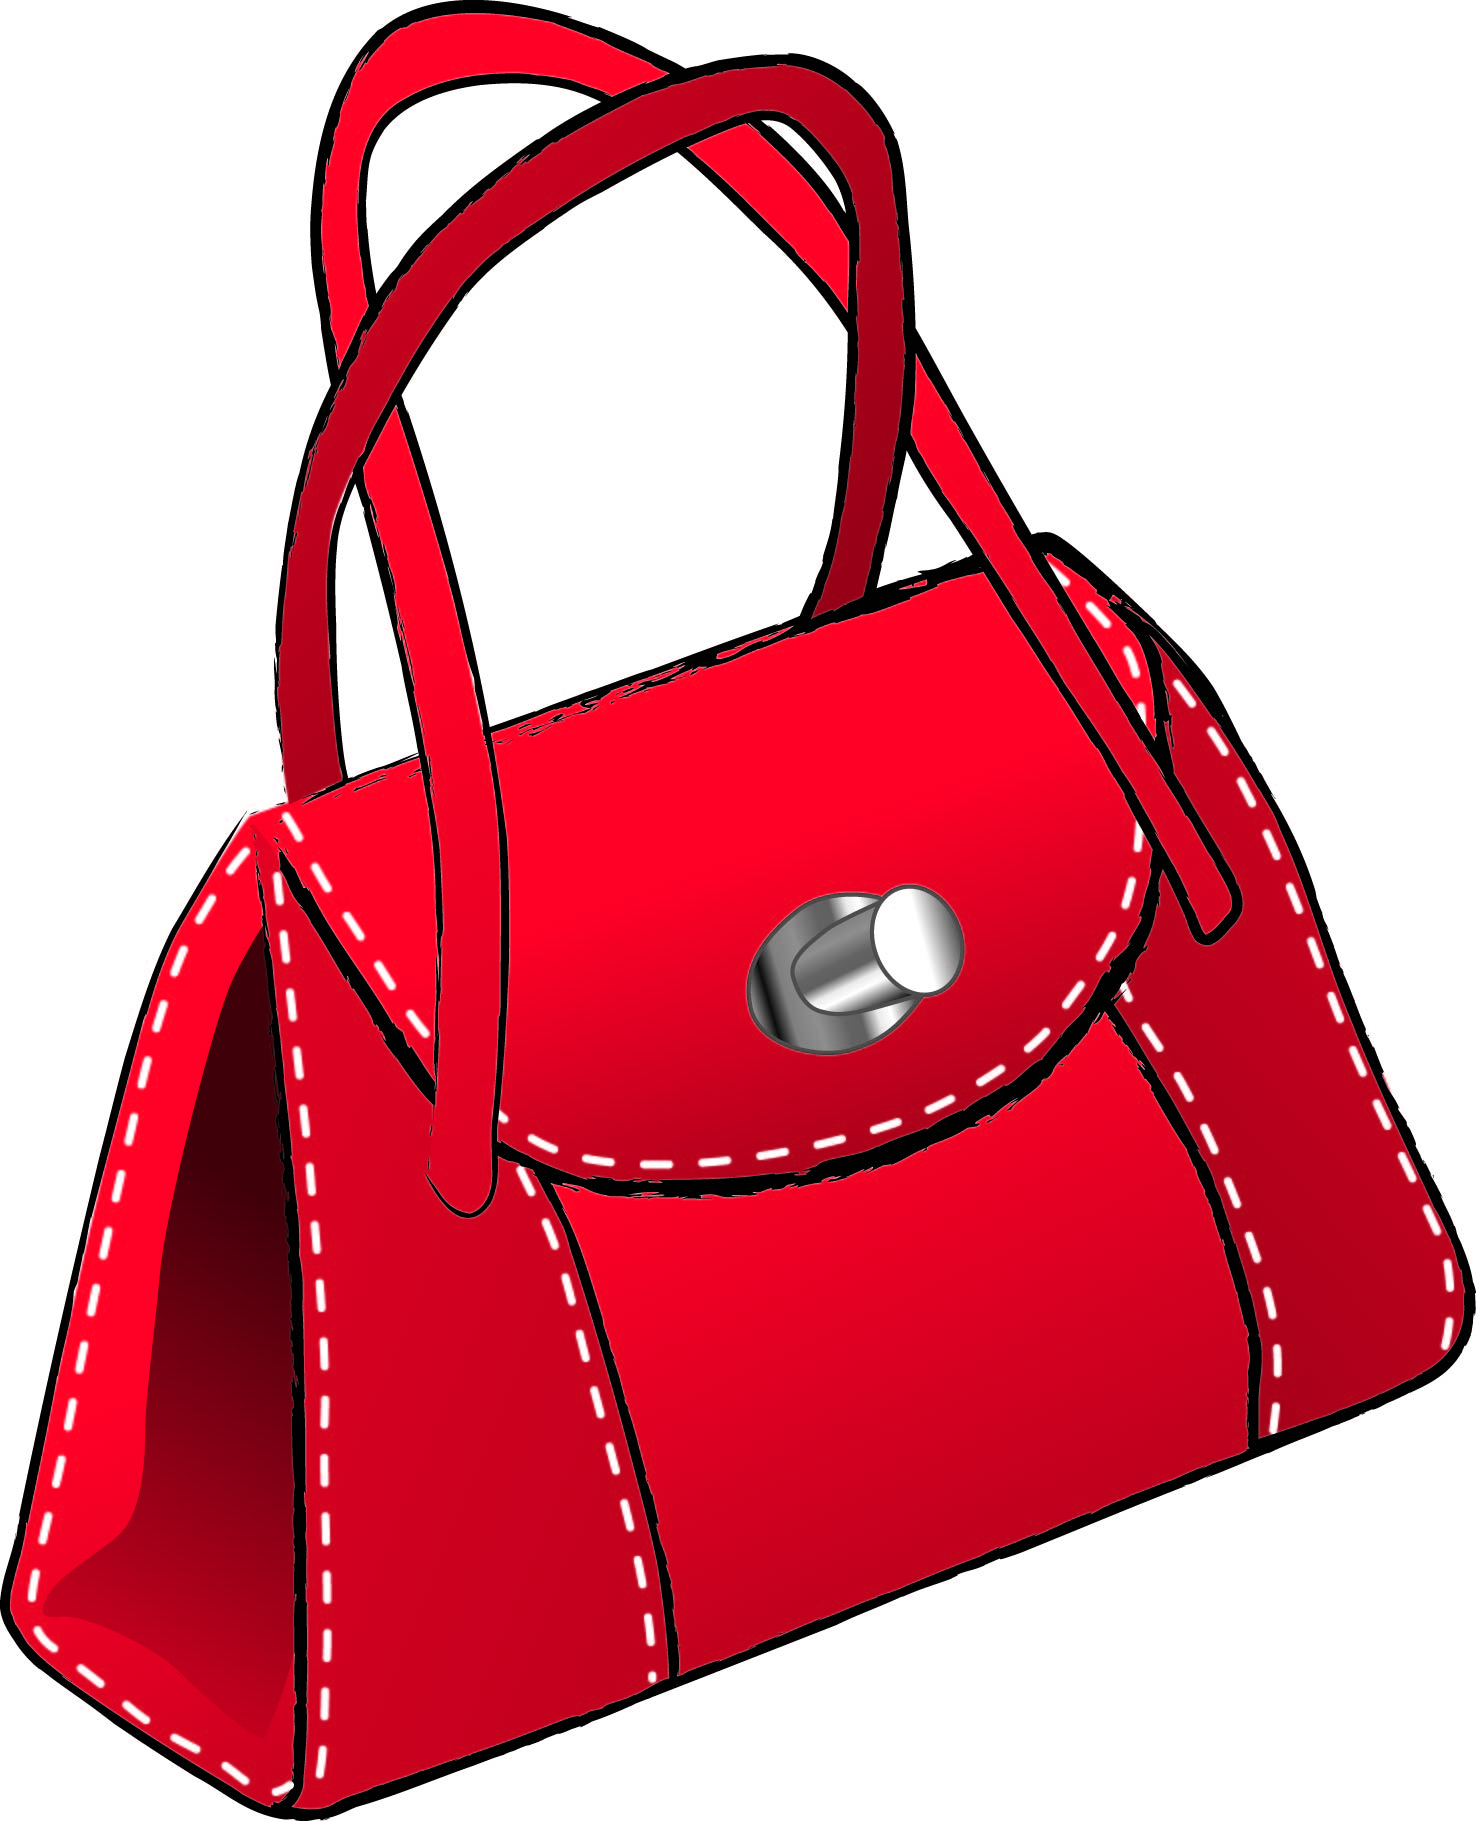 Custom handbags and purses clipart with images of handbags clip